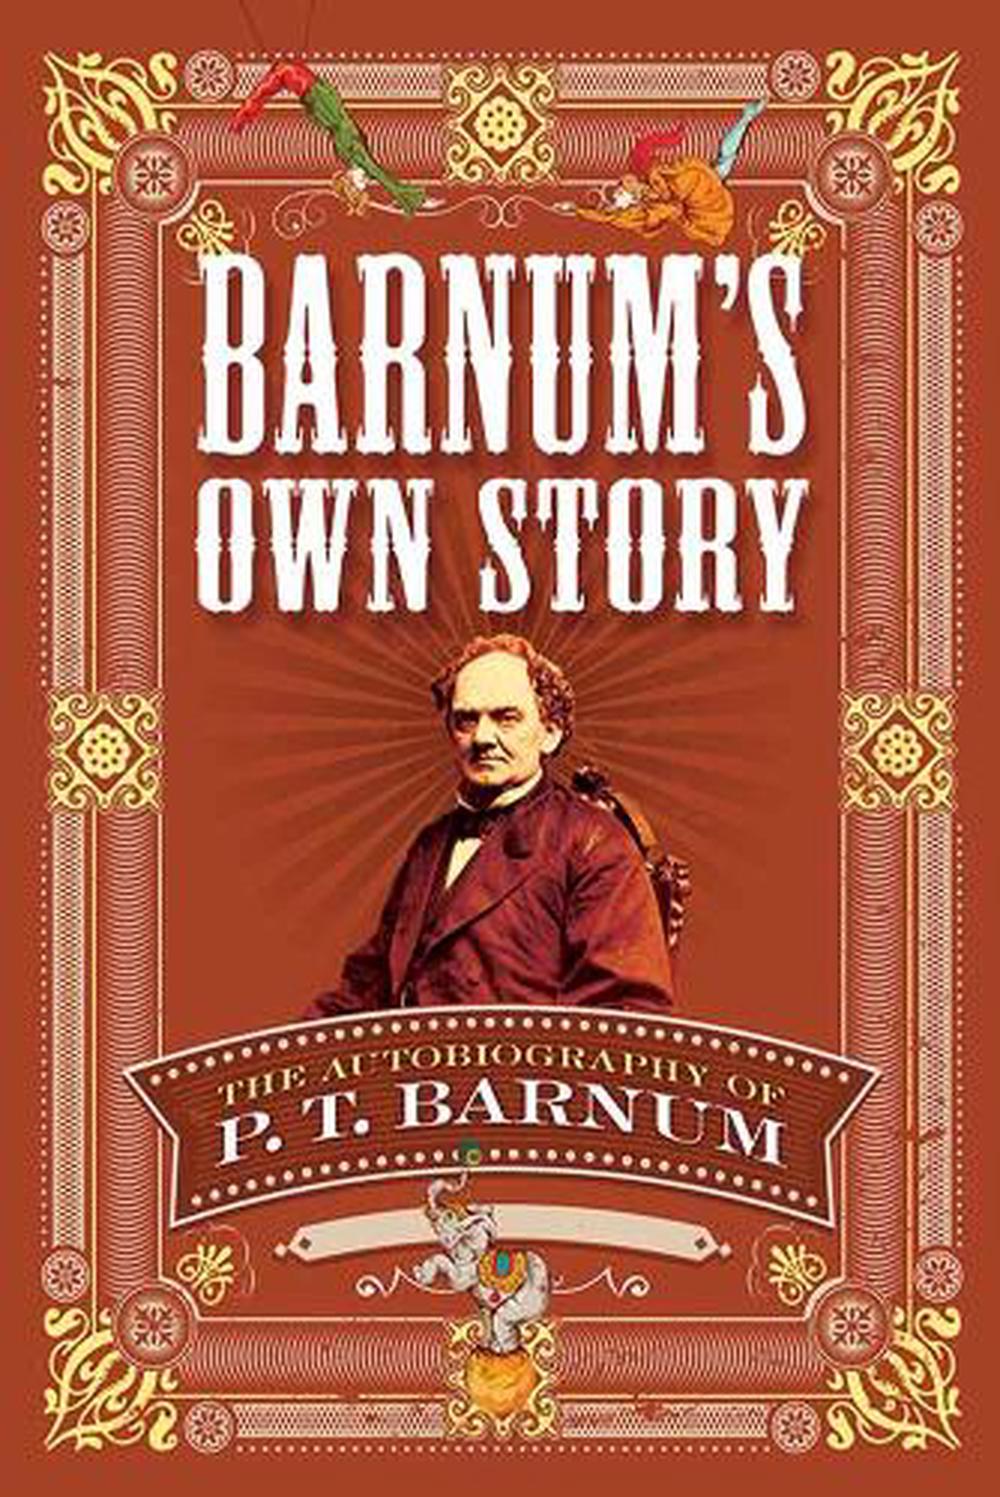 The Life of P. T. Barnum by P.T. Barnum